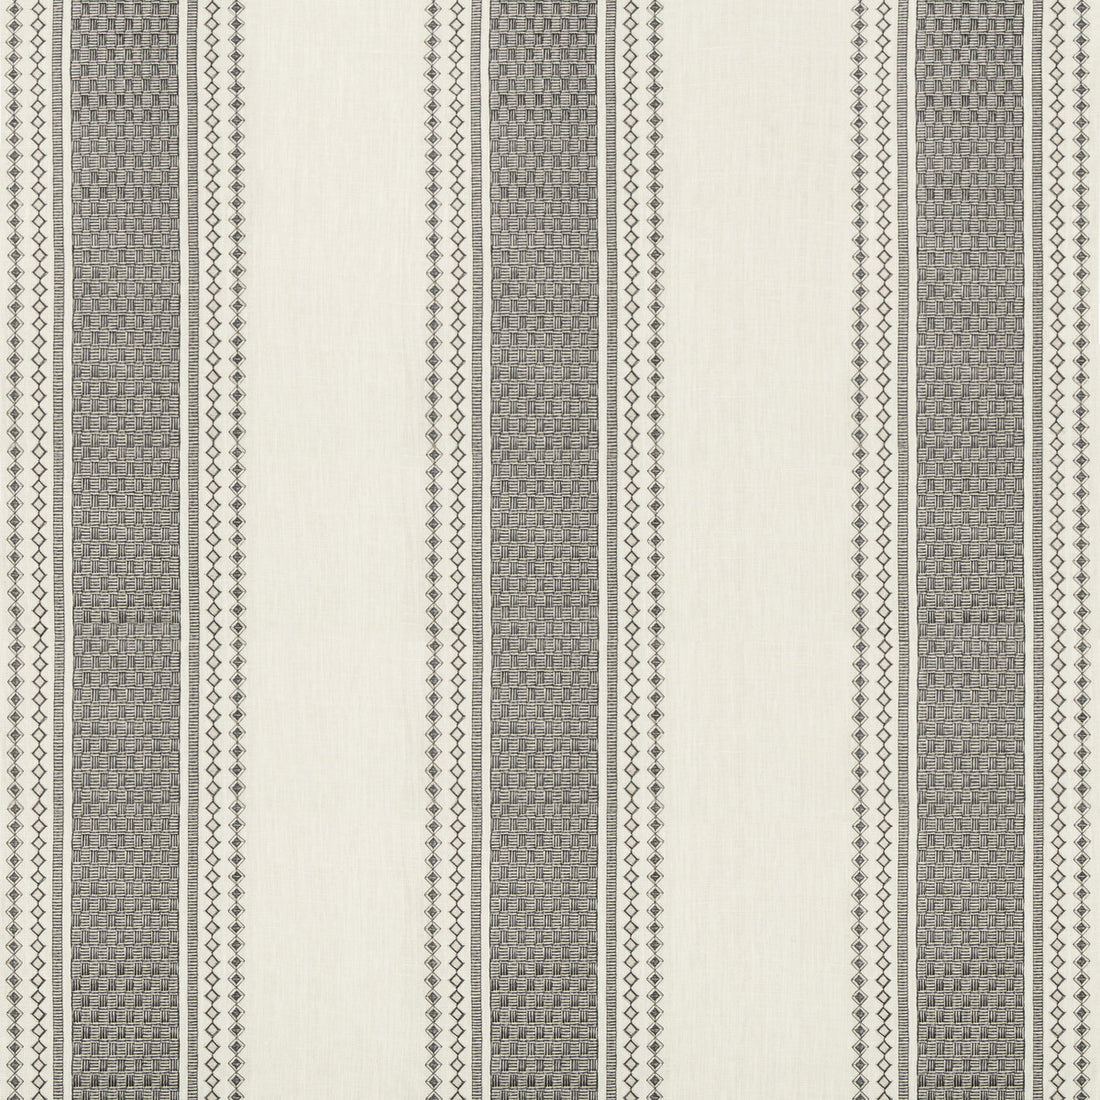 Couturier fabric in ink color - pattern 35509.81.0 - by Kravet Design in the Barclay Butera Sagamore collection